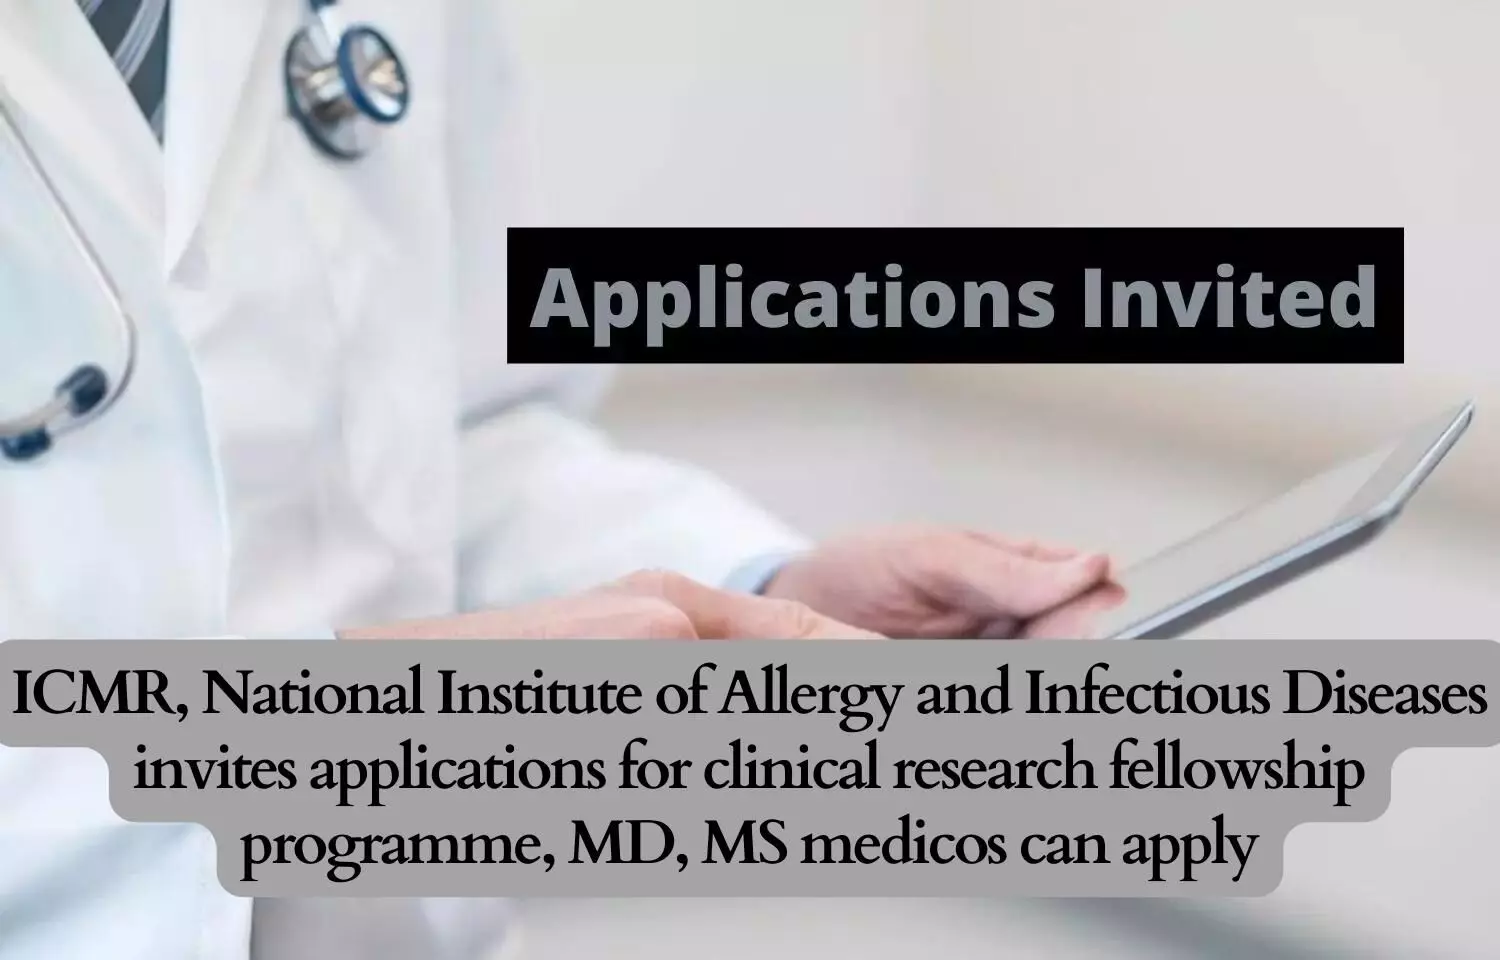 ICMR, National Institute of Allergy and Infectious Diseases invite applications for clinical research fellowship programme